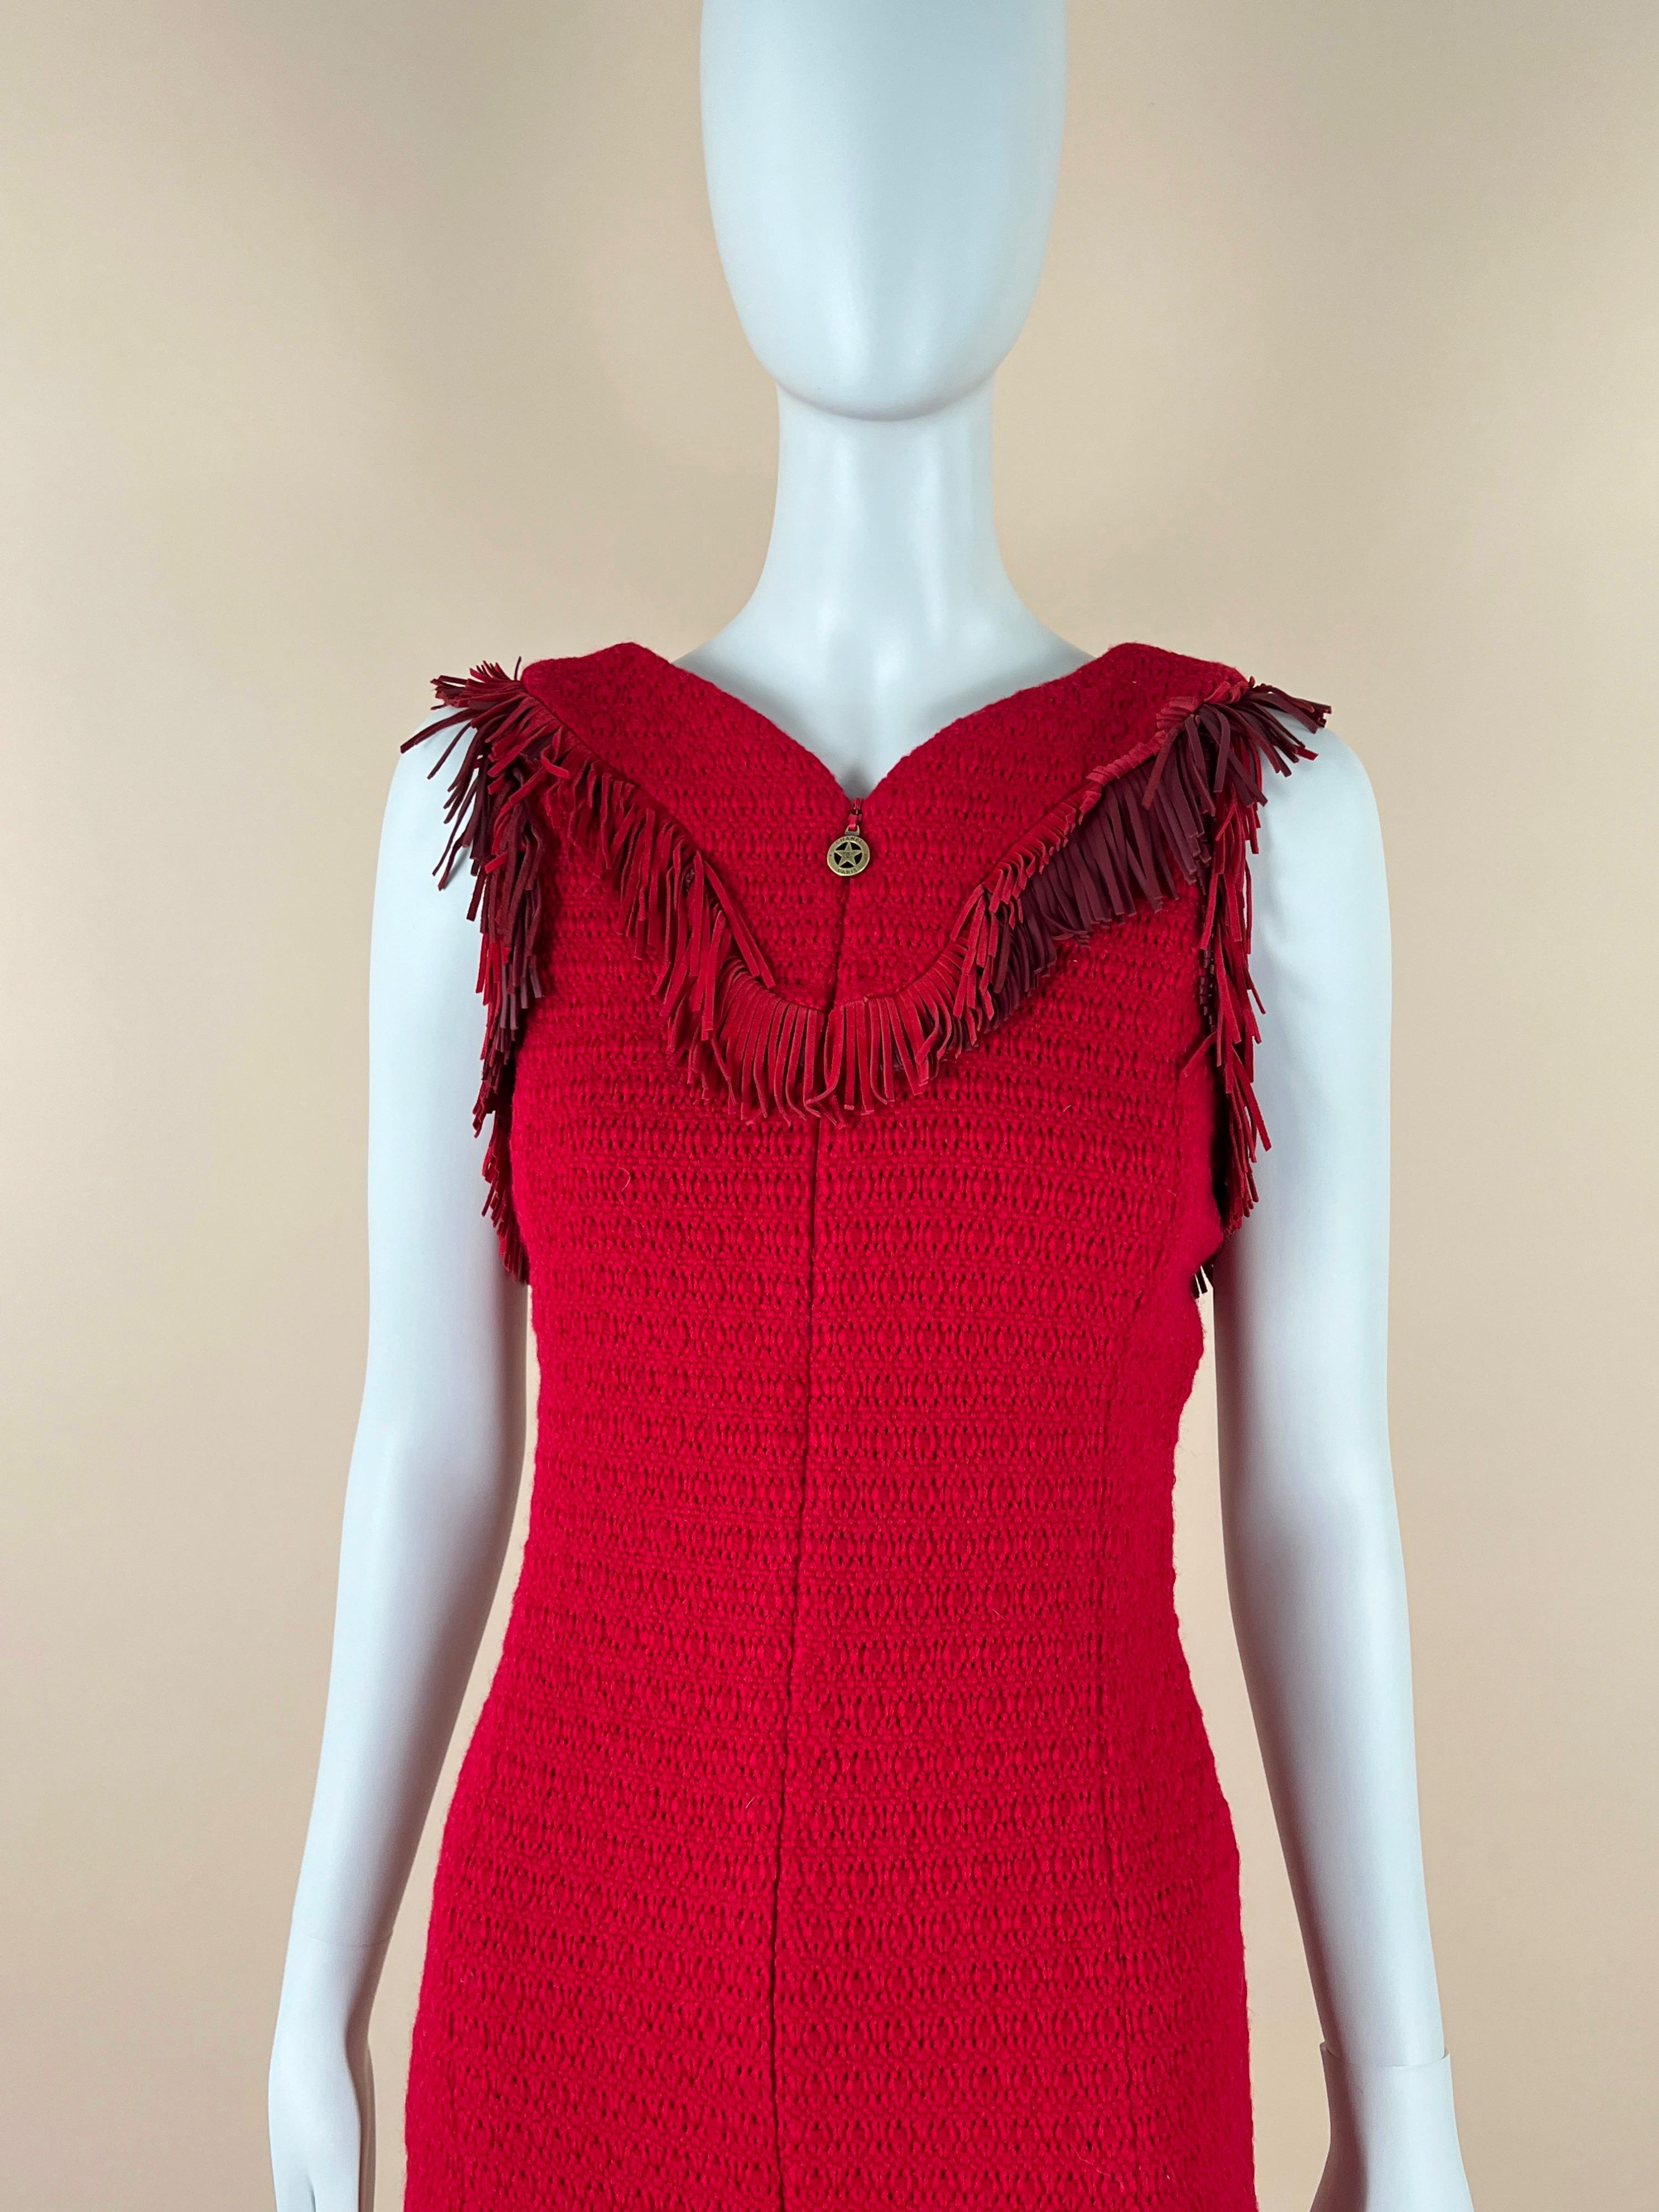 Chanel Dallas Collection Suede Fringed Tweed Dress 5